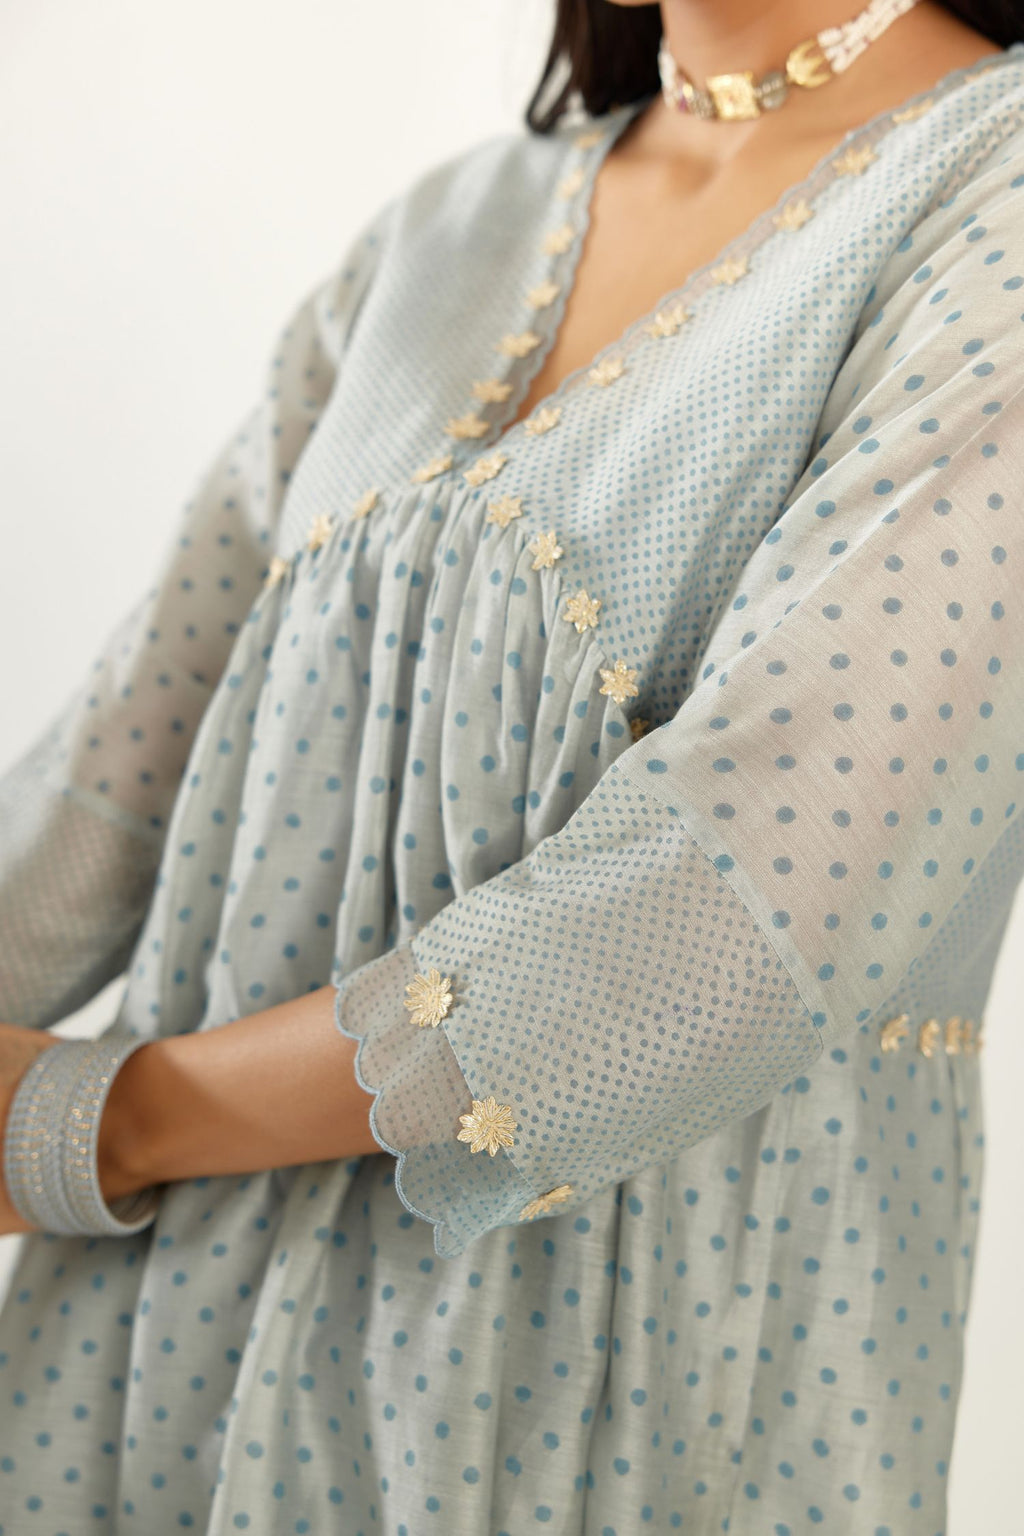 Blue hand block printed V neck gathered kurta set, highlighted with gota flower embroidery and scalloped organza at edges.